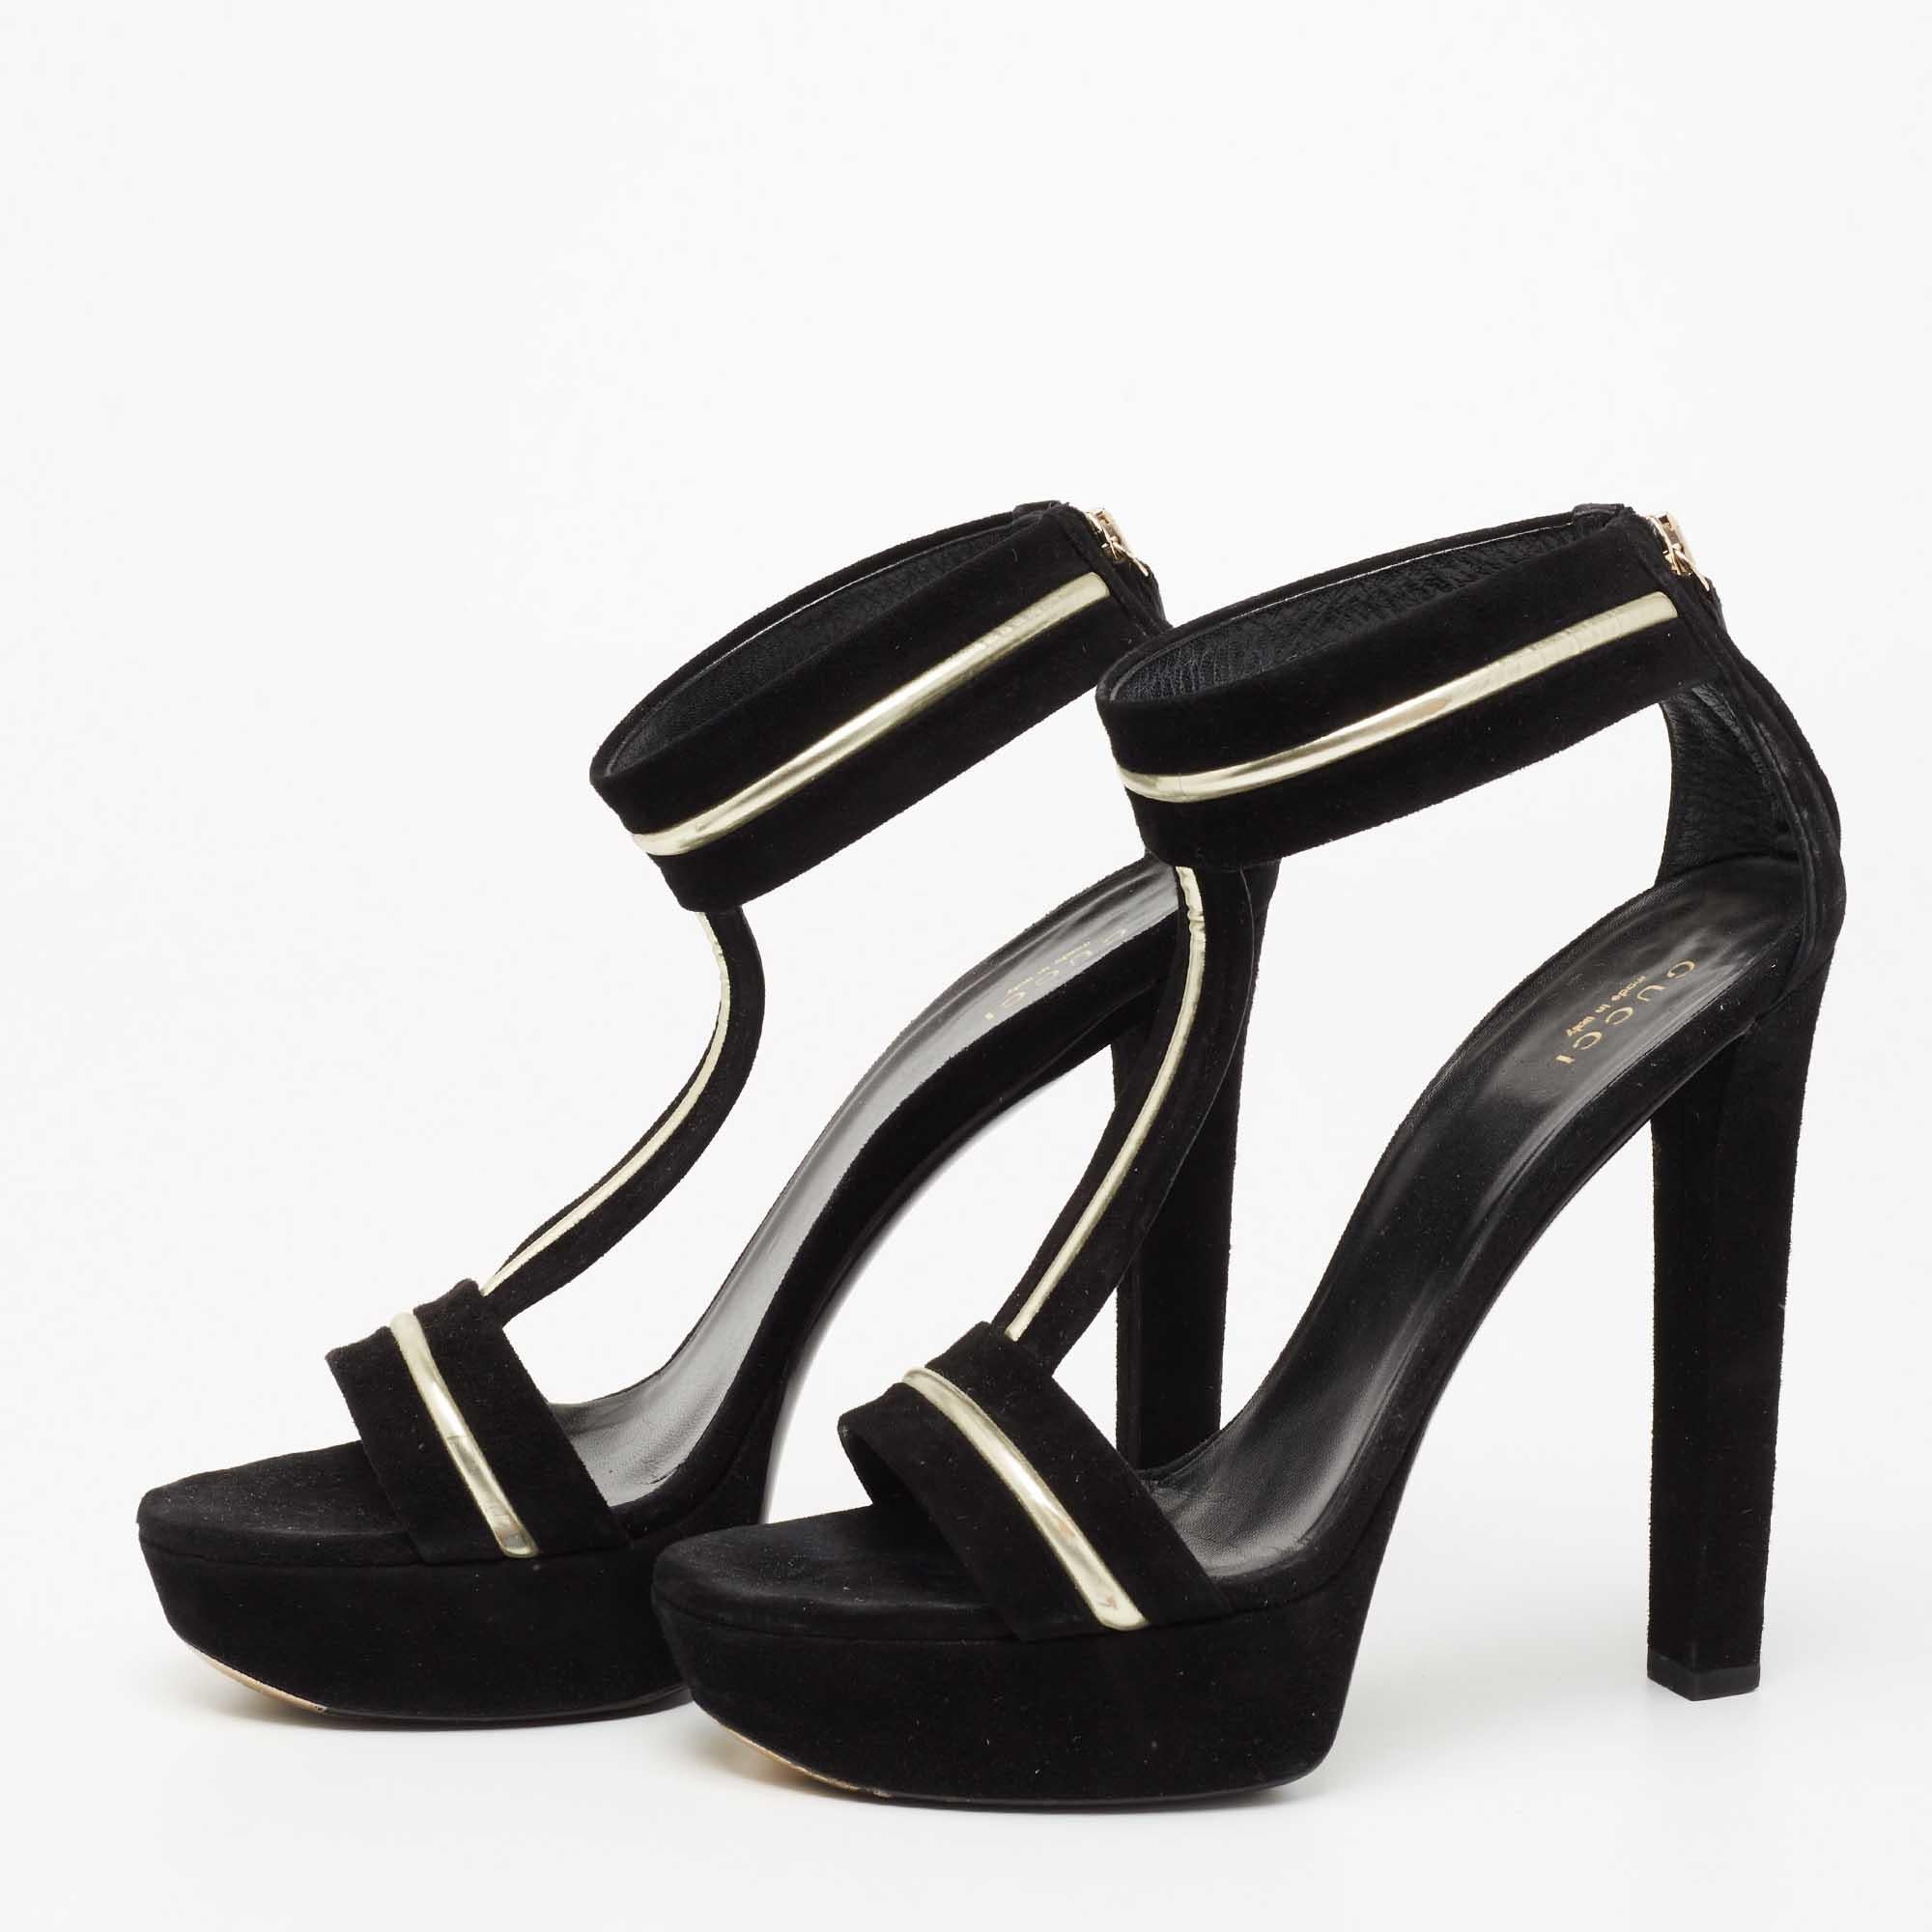 These sandals from the House of Gucci are all about flaunting eternal class and elegance! They are made from black suede and leather on the exterior. They feature open toes, an ankle strap, and tall 14 cm heels. Show off your chic style with these